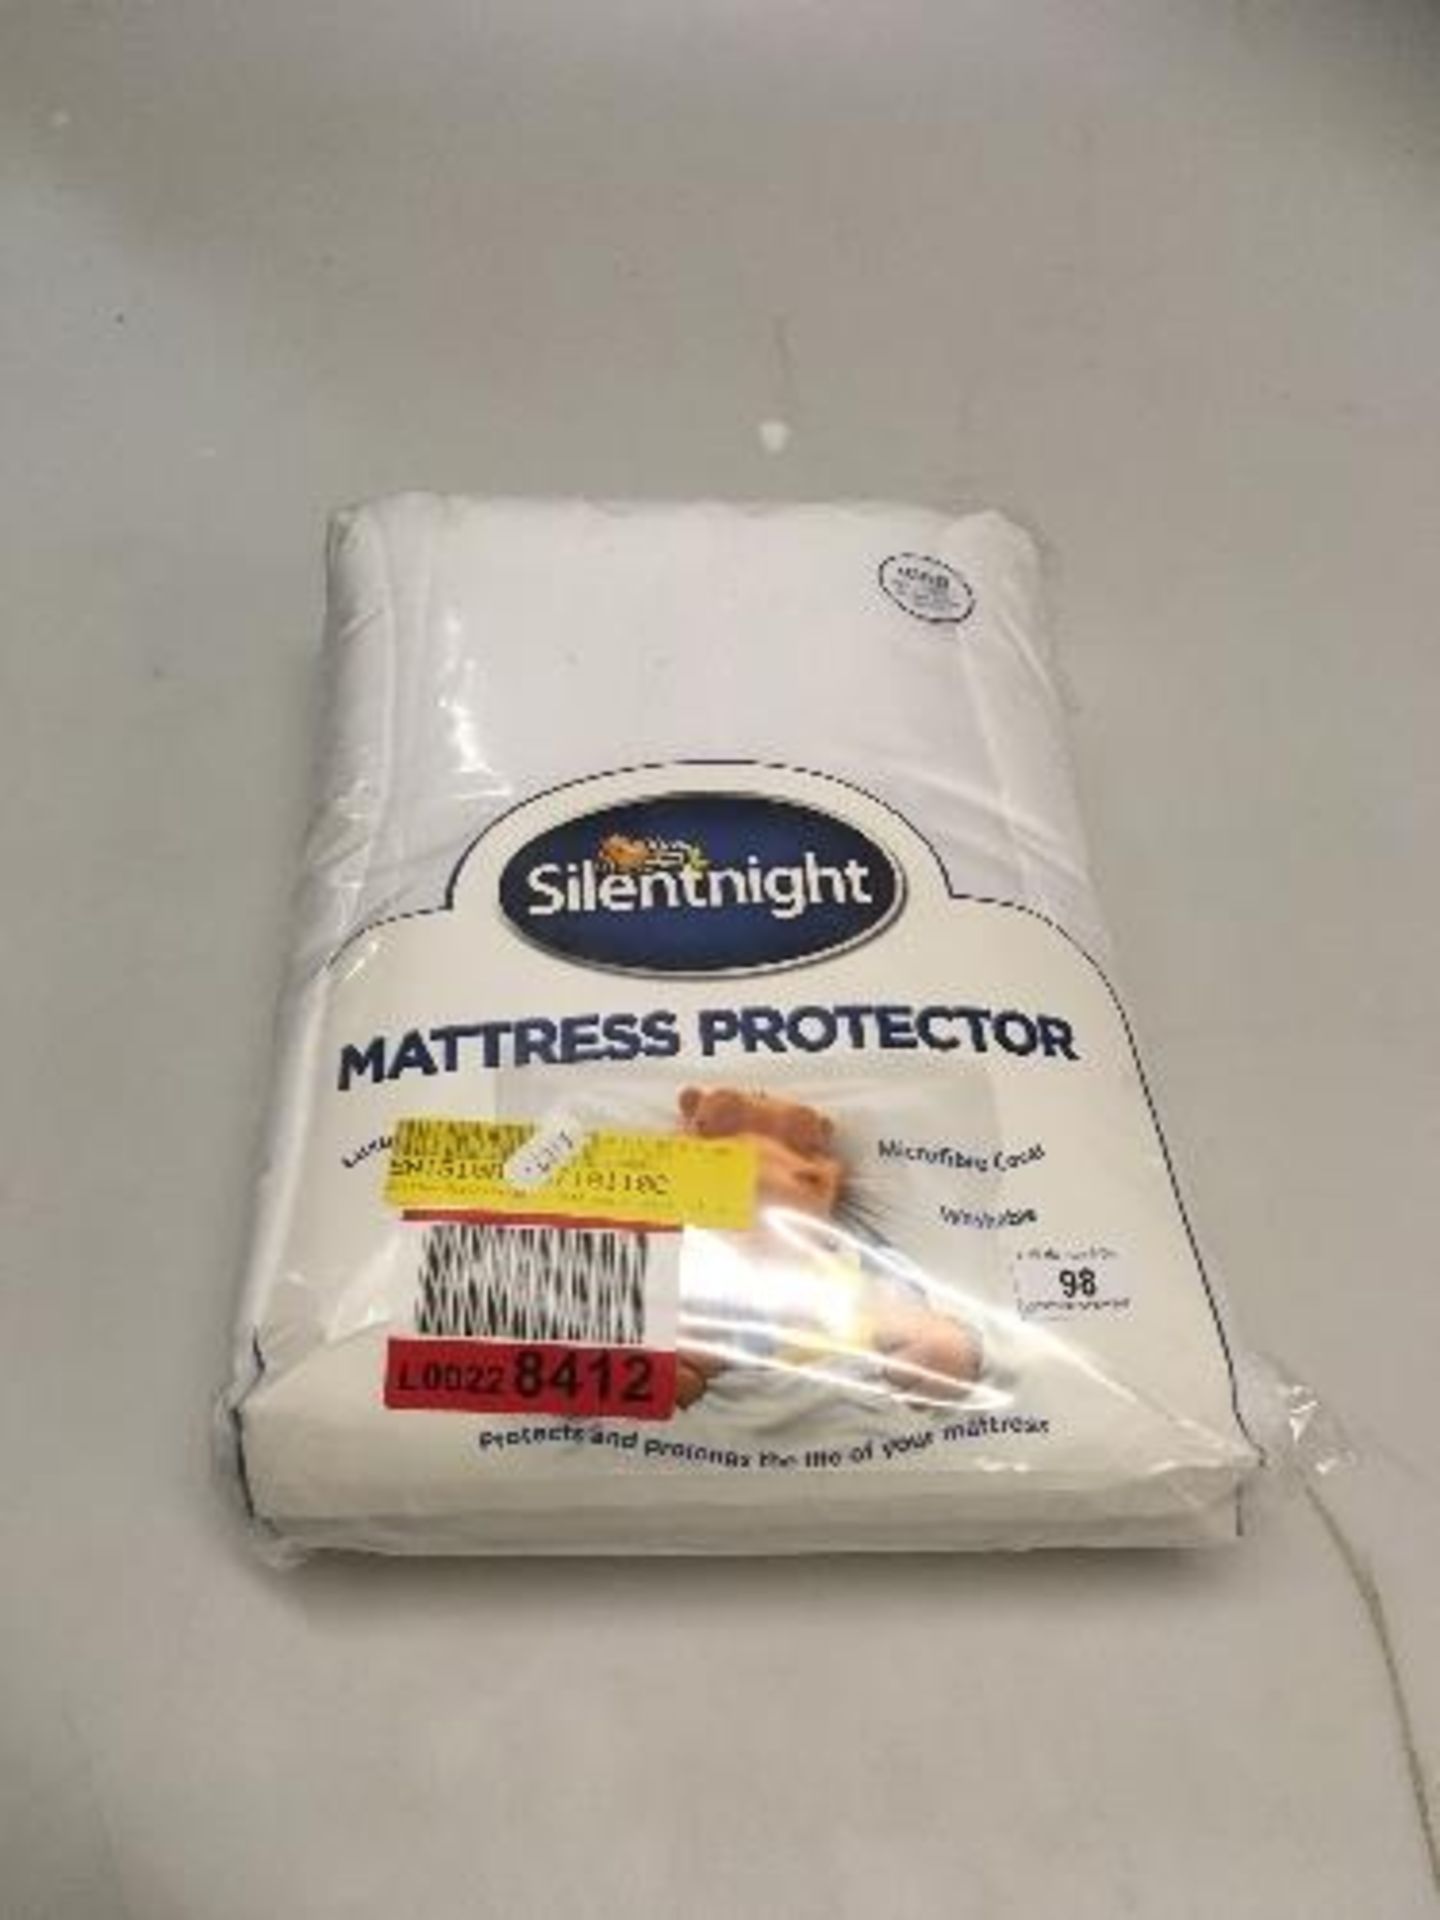 Quilted Hypoallergenic Mattress Protector - kingsize by Silentnight - Image 2 of 2